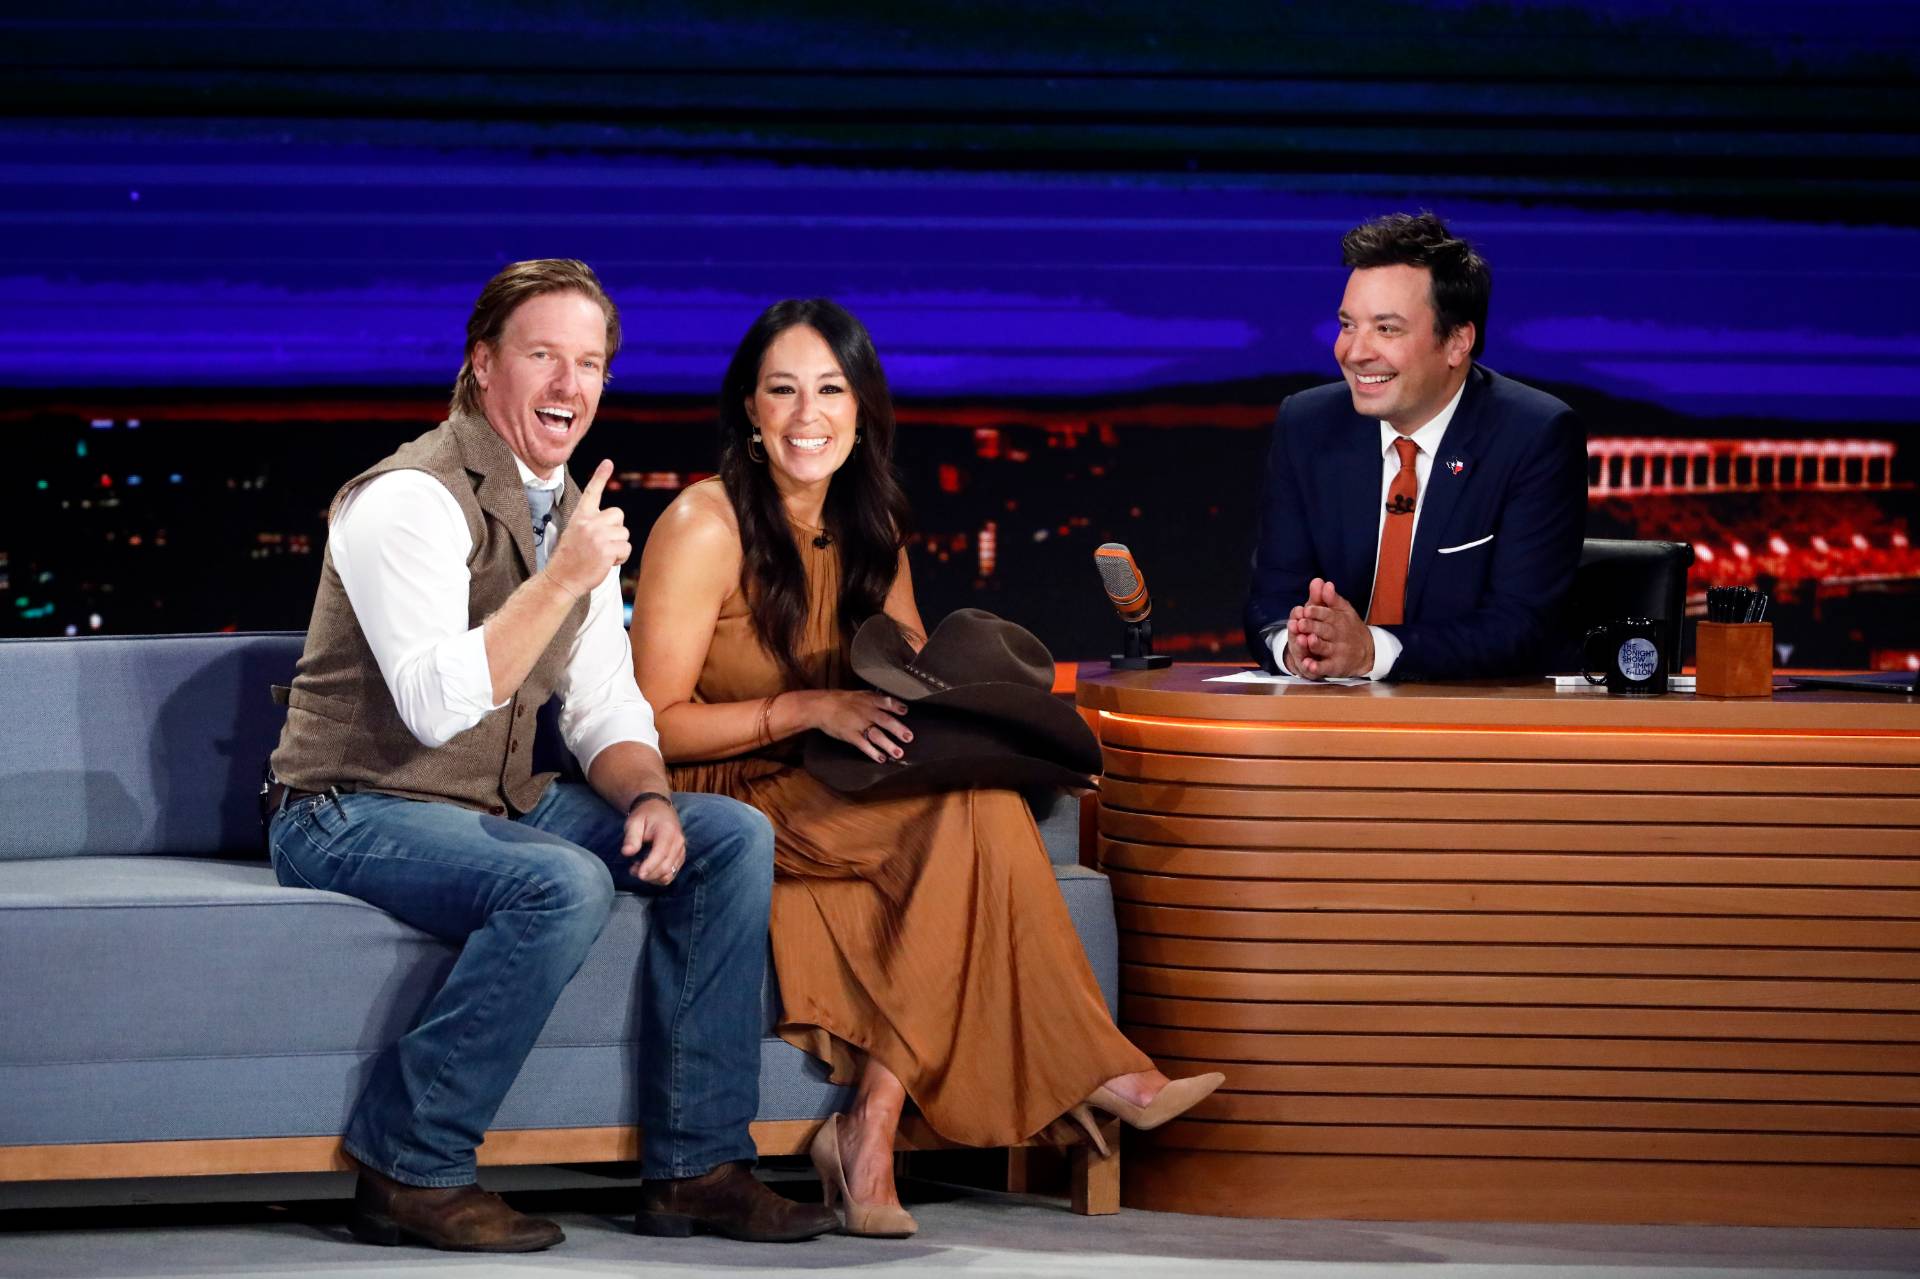 Chip and Joanna Gaines on The Tonight Show Starring Jimmy Fallon | Andrew Lipovsky/NBC/NBCU Photo Bank via Getty Images